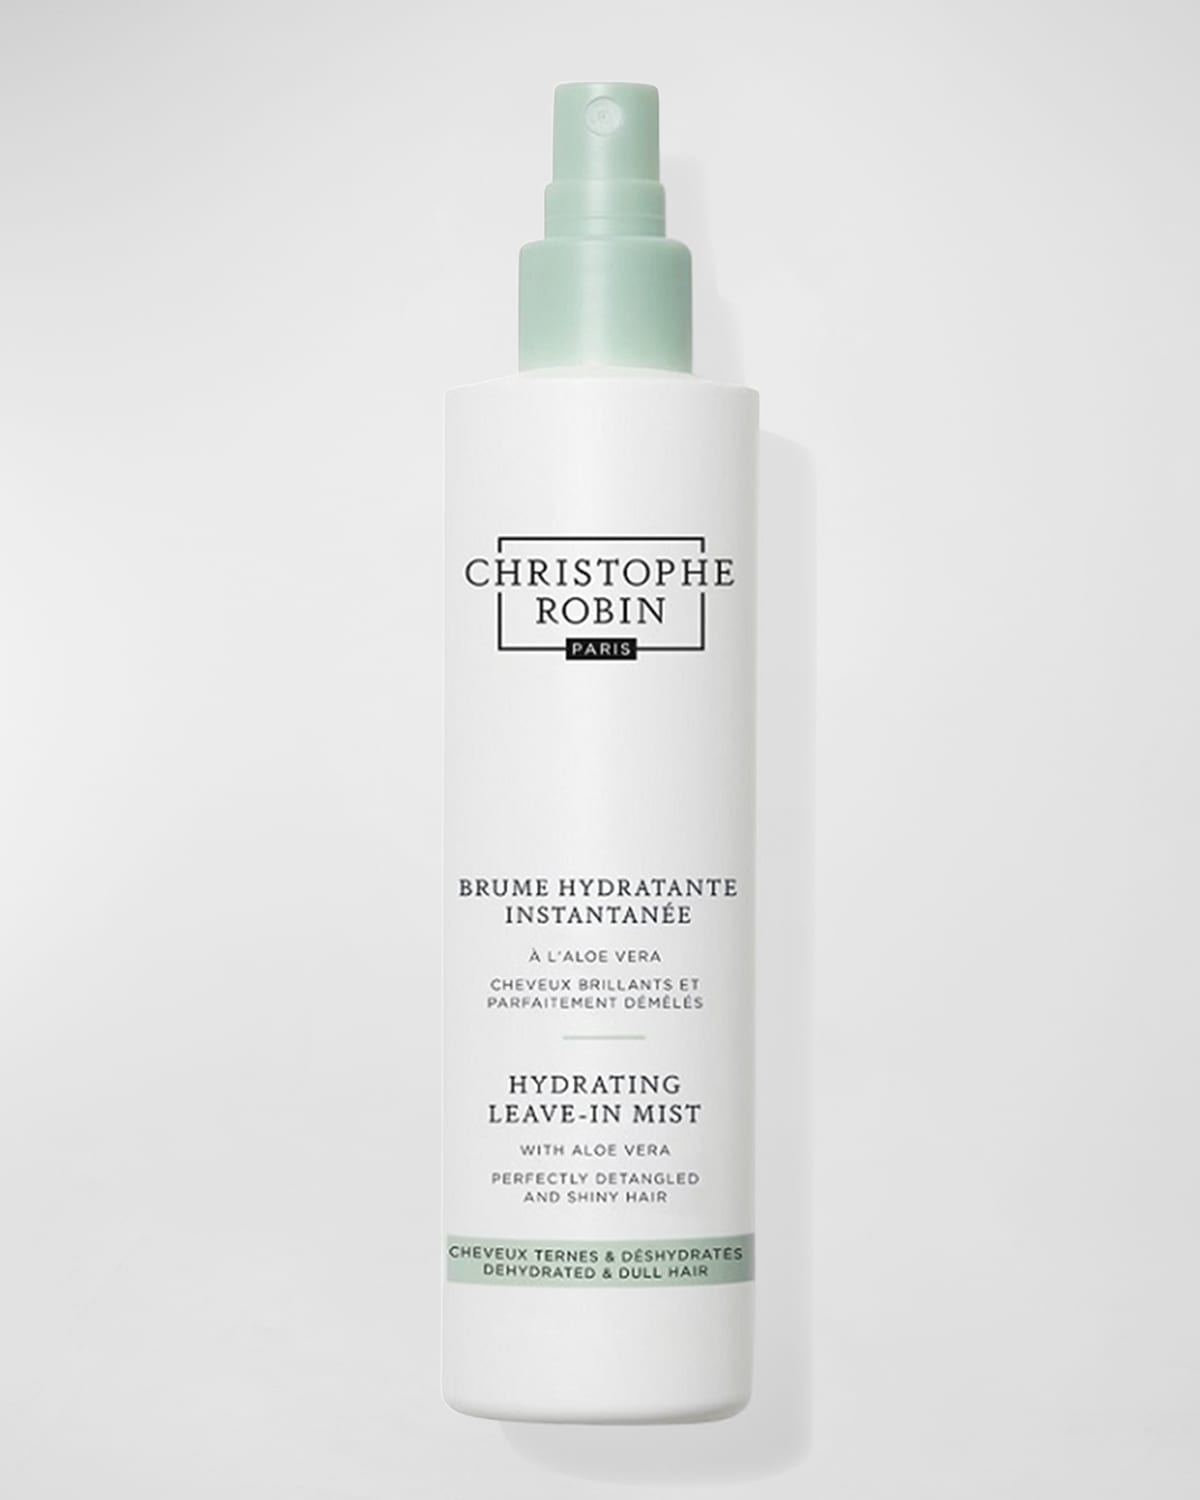 5 oz. Hydrating Leave-In Mist with Aloe Vera